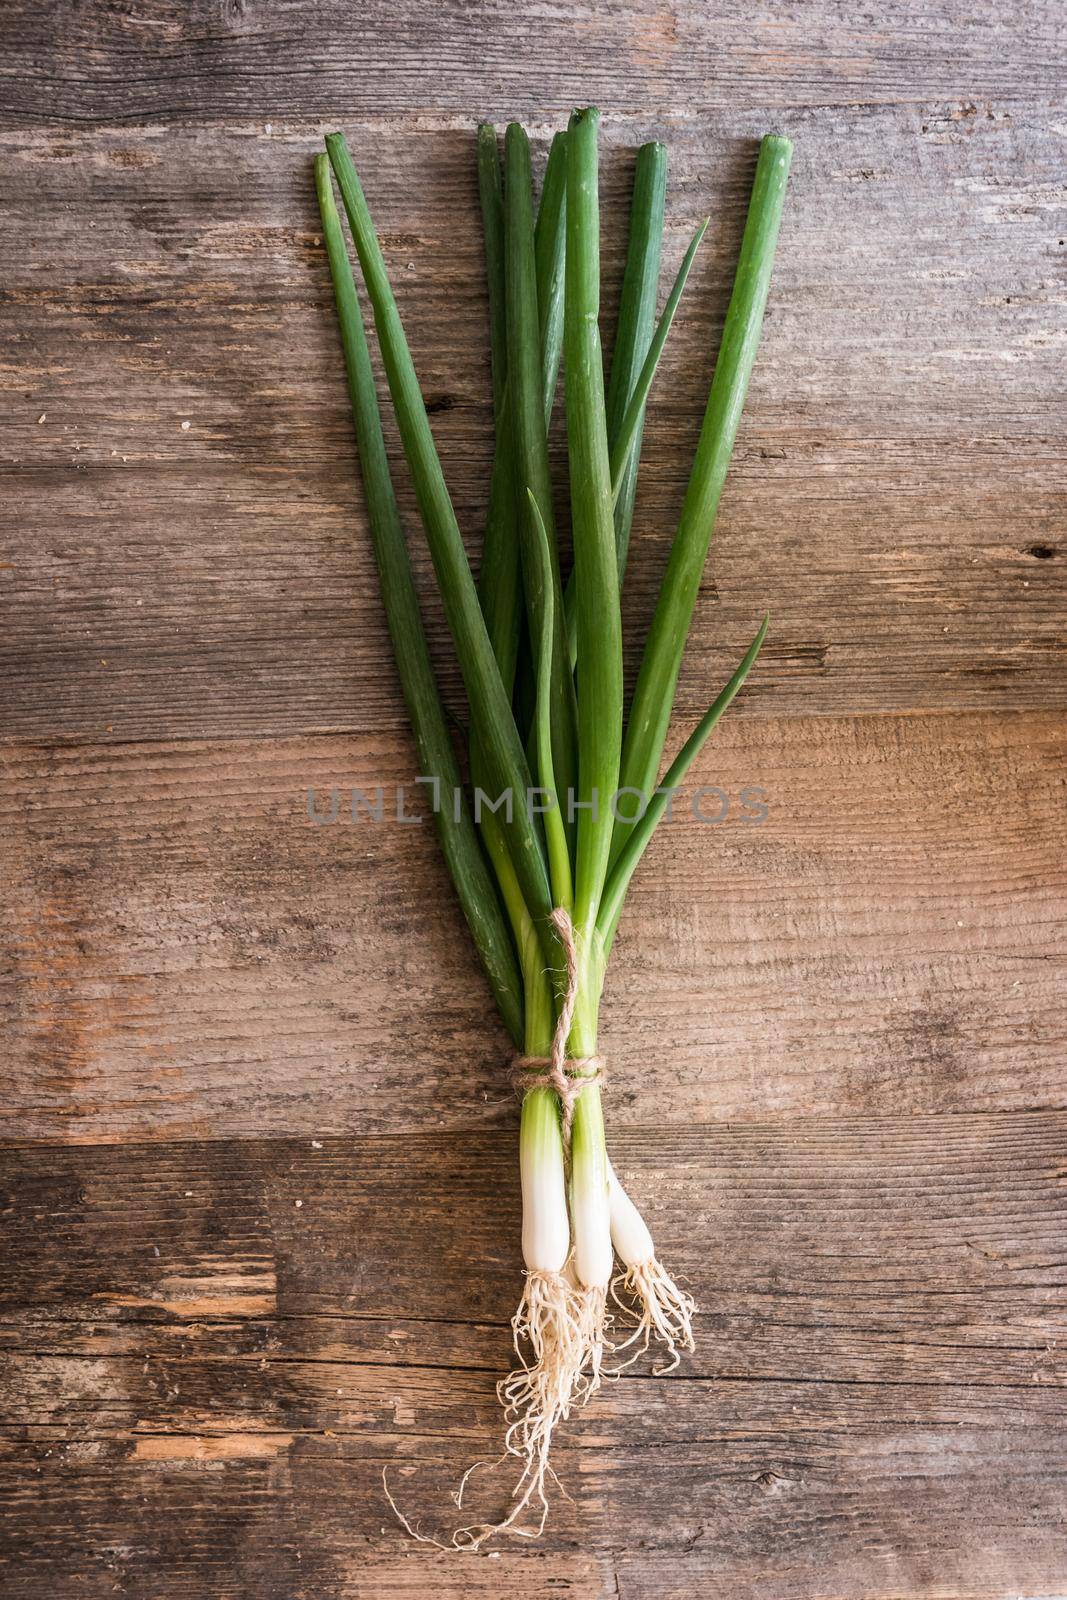 bynch of spring onion on wooden background